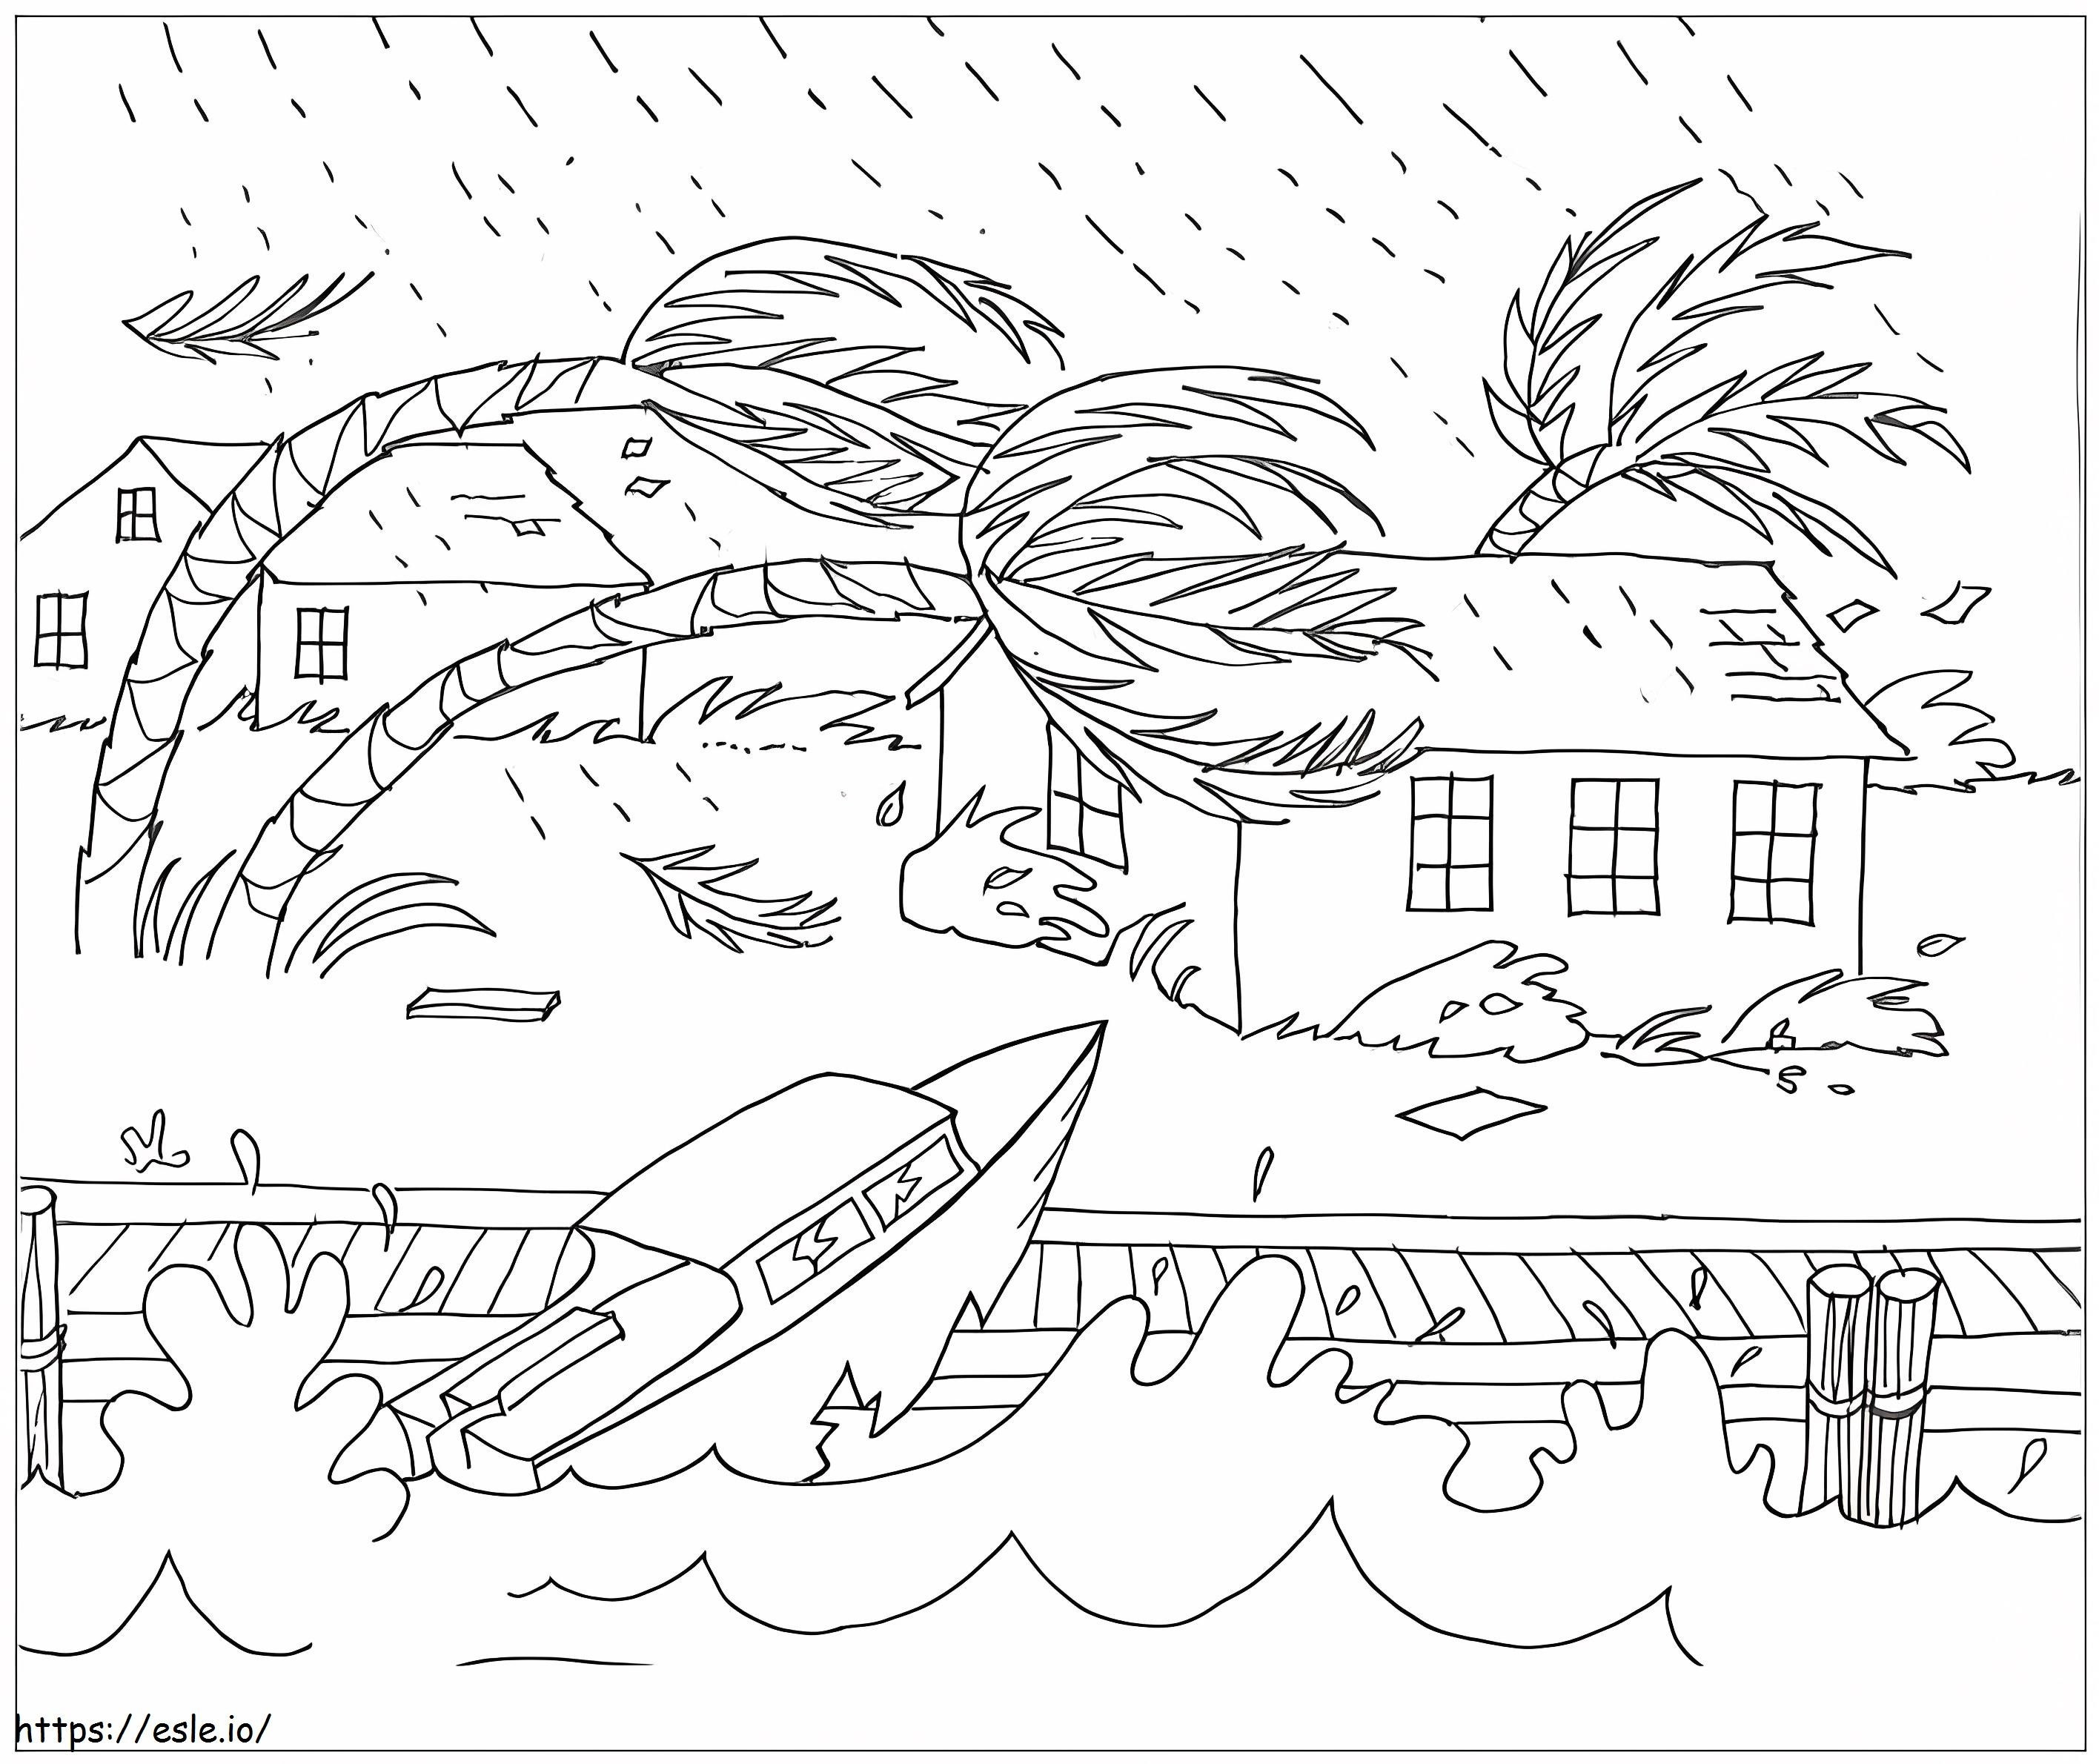 A Severe Weather coloring page